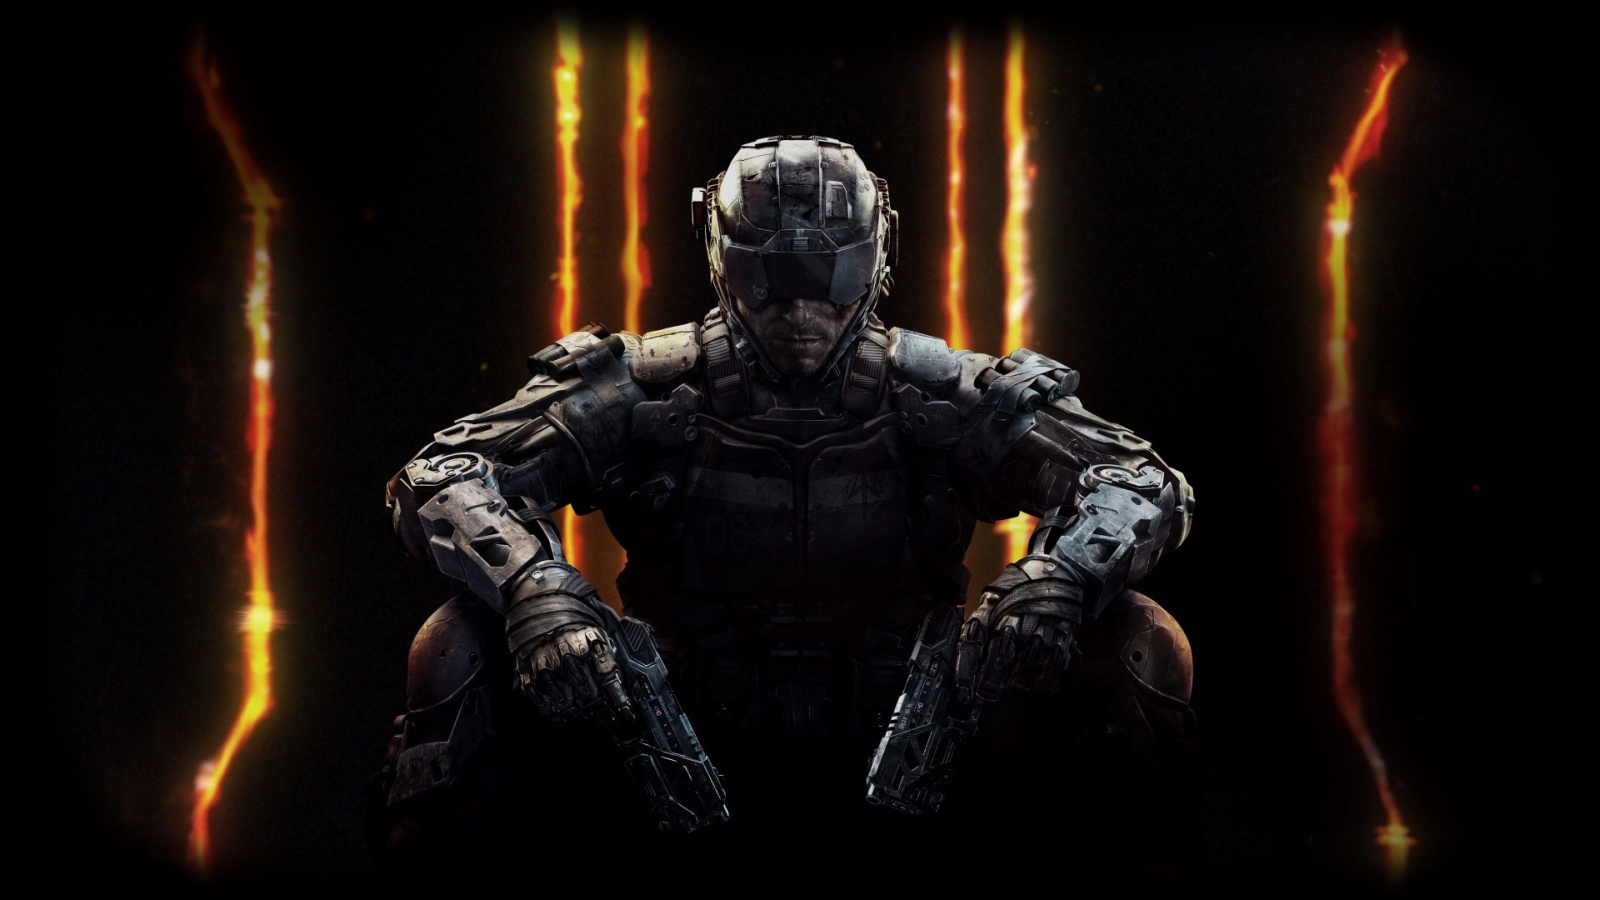 Call of Duty Black Ops 3 lead